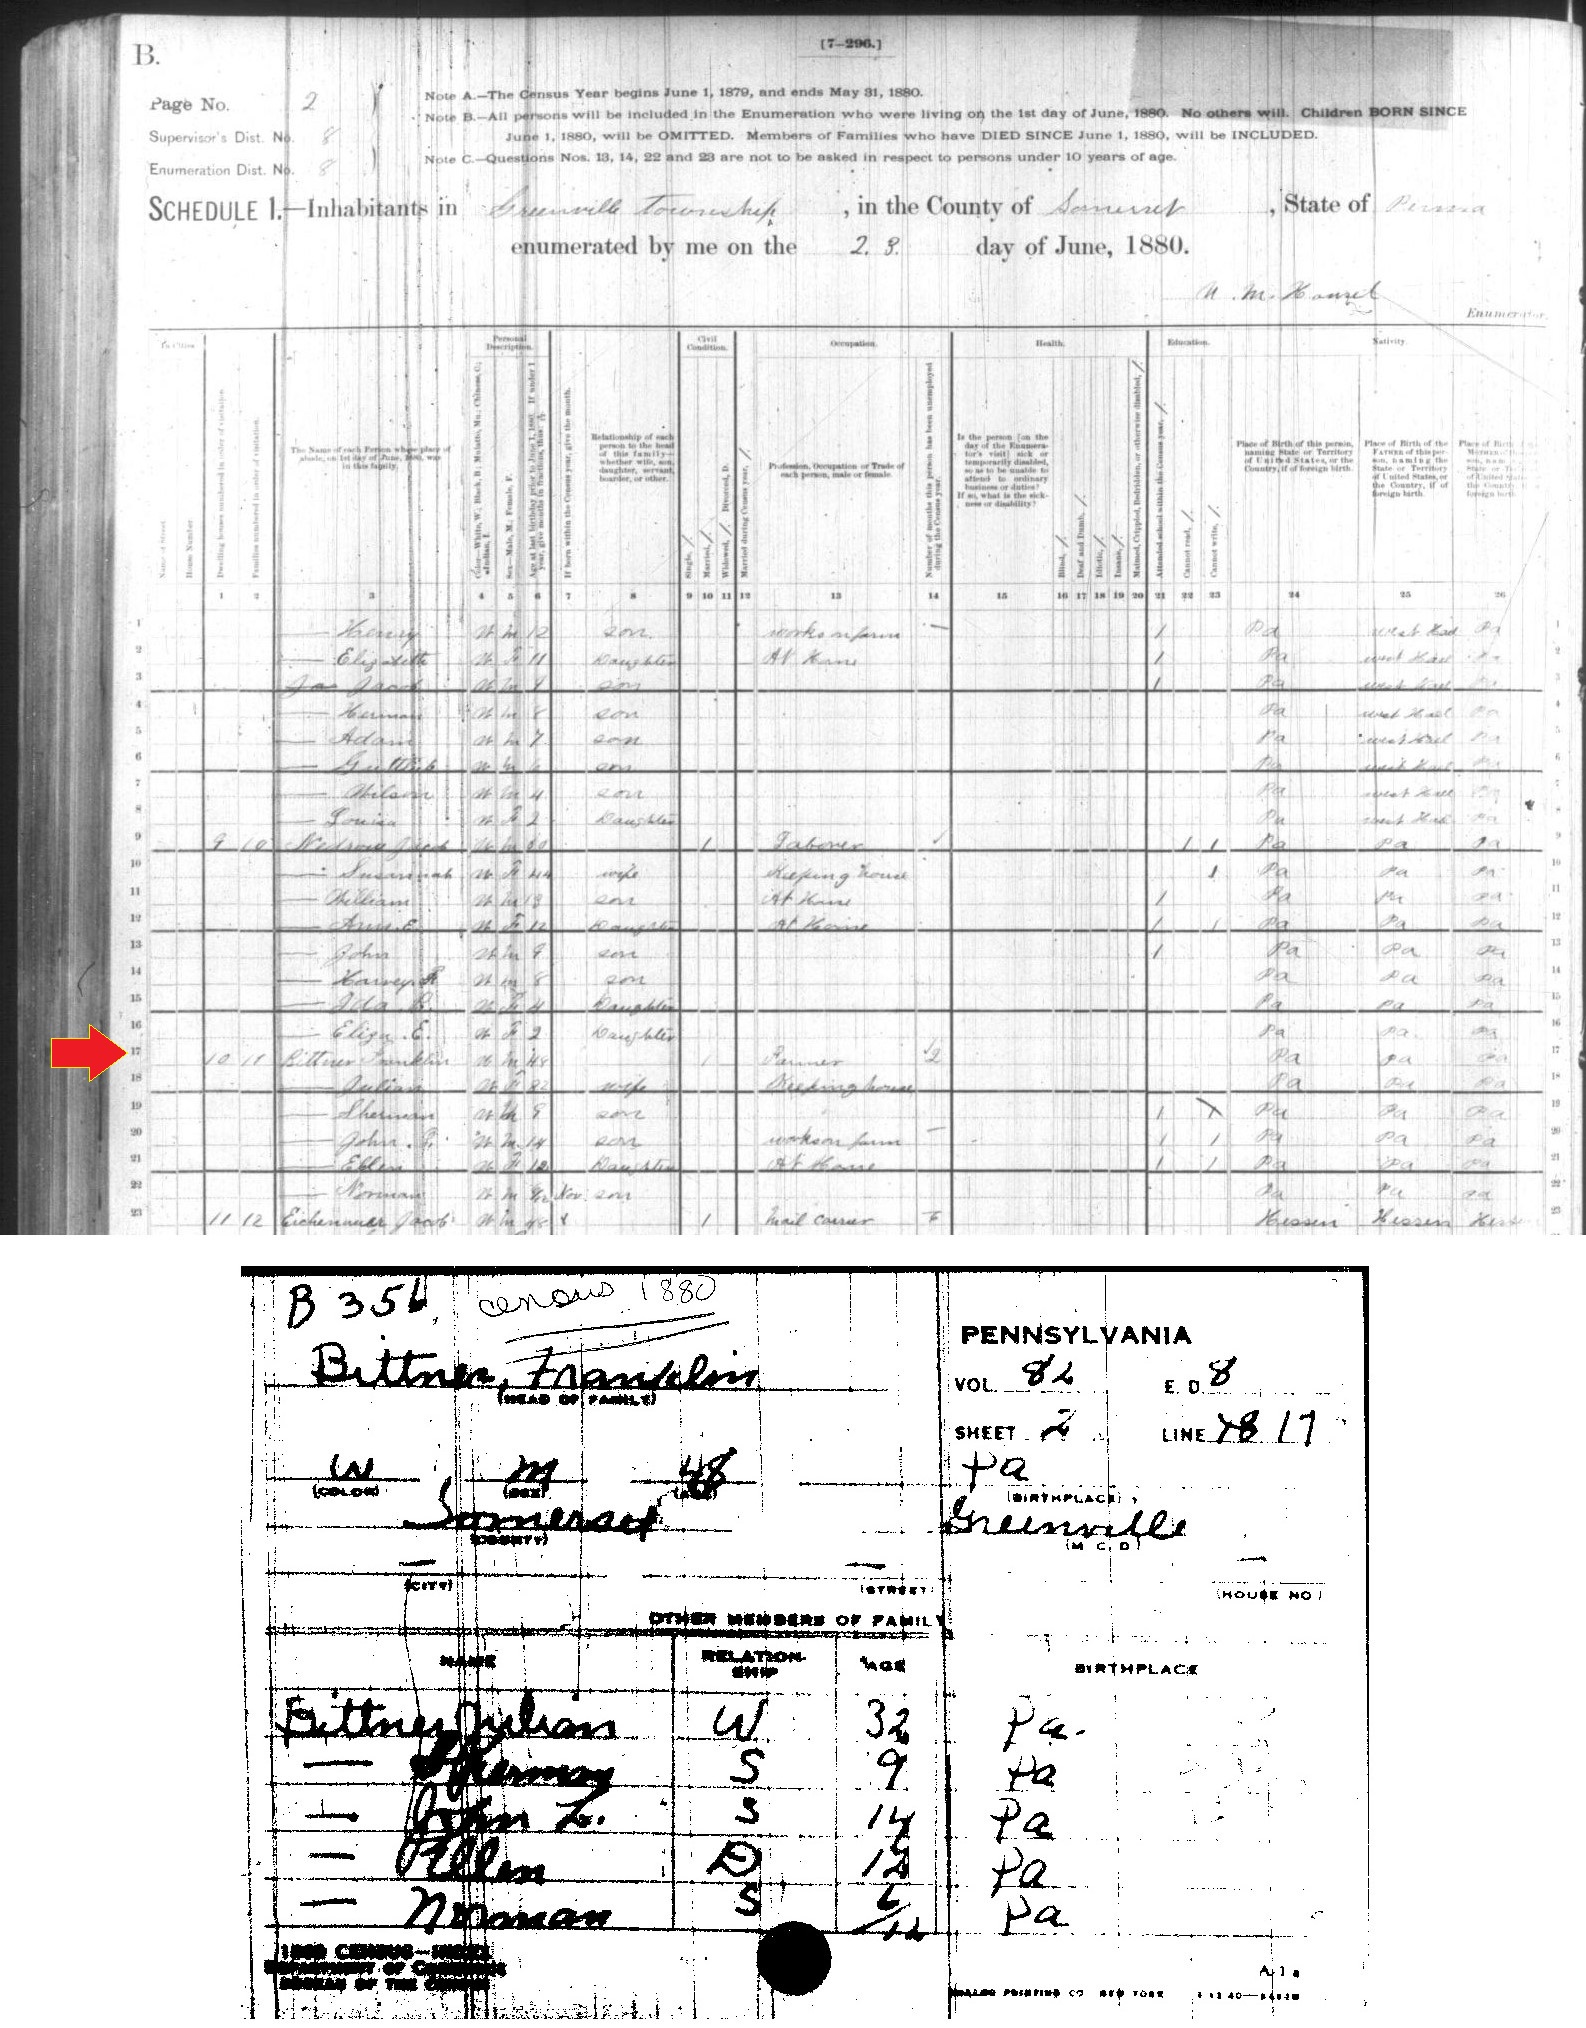 Franklin Bittner household in the 1880 census records of Somerset County, Pennsylvania.